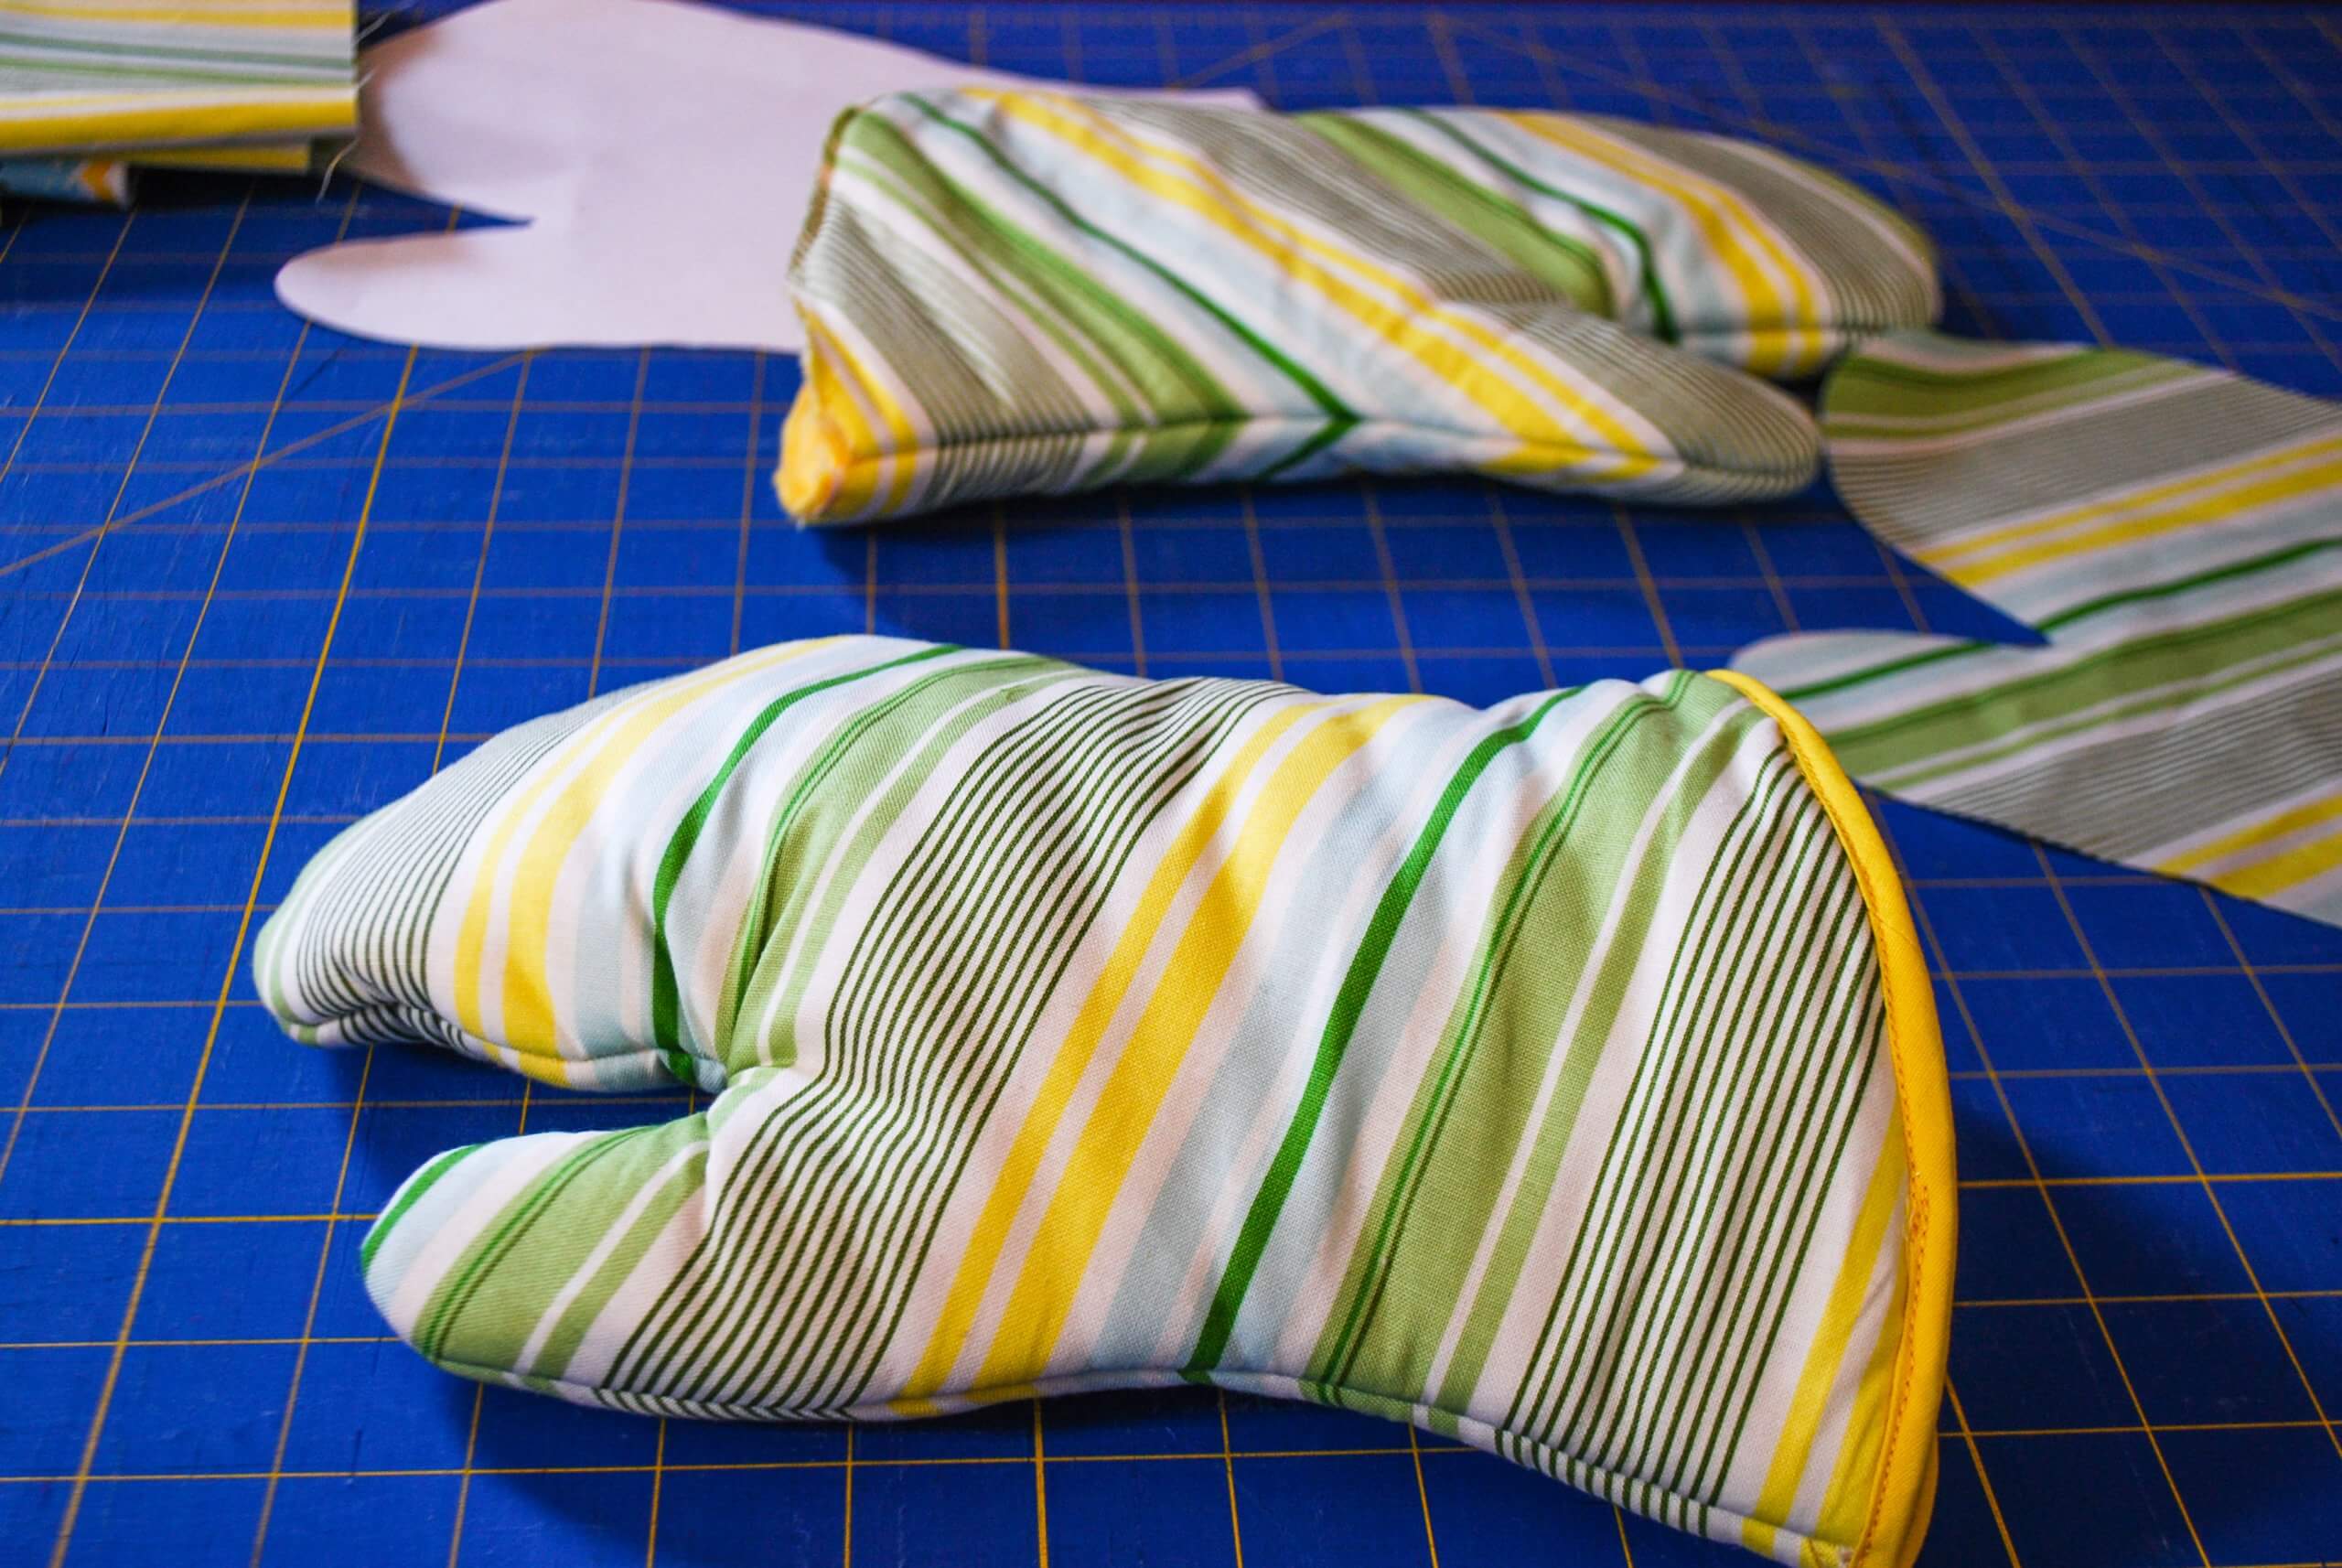 How to Recover Oven Mitts - Simple Sewing Project